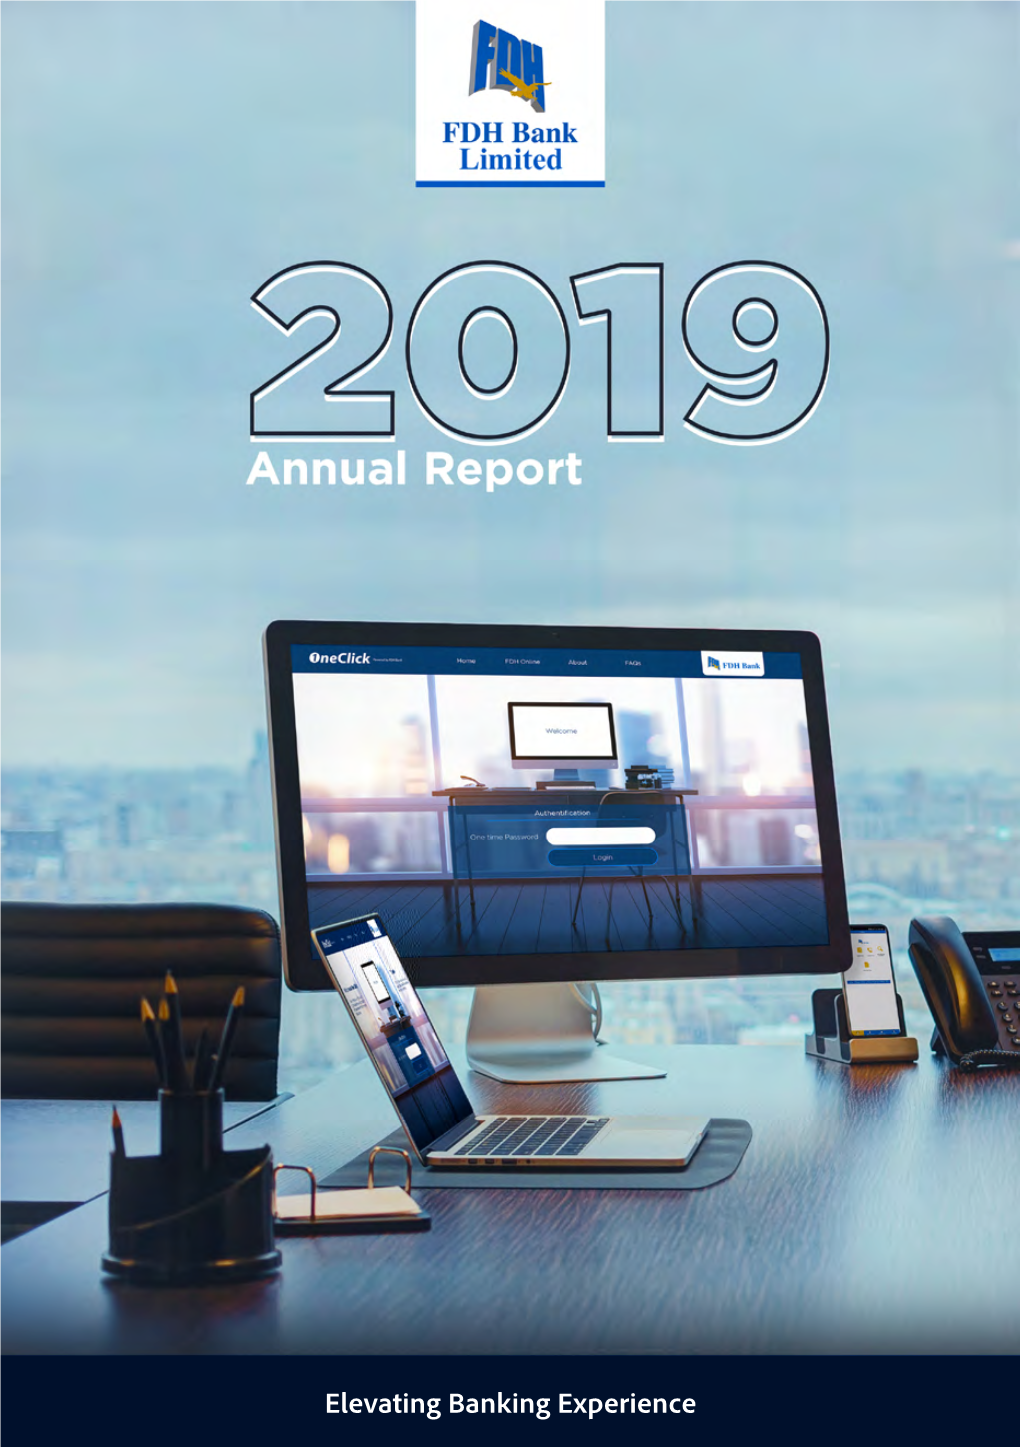 FDH Bank 2019 Annual Report